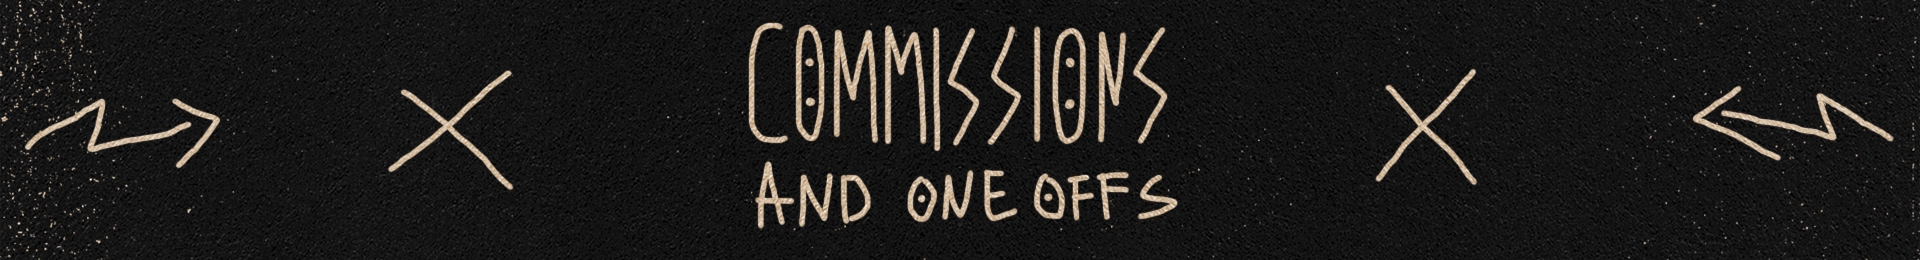 commissions and one offs banner